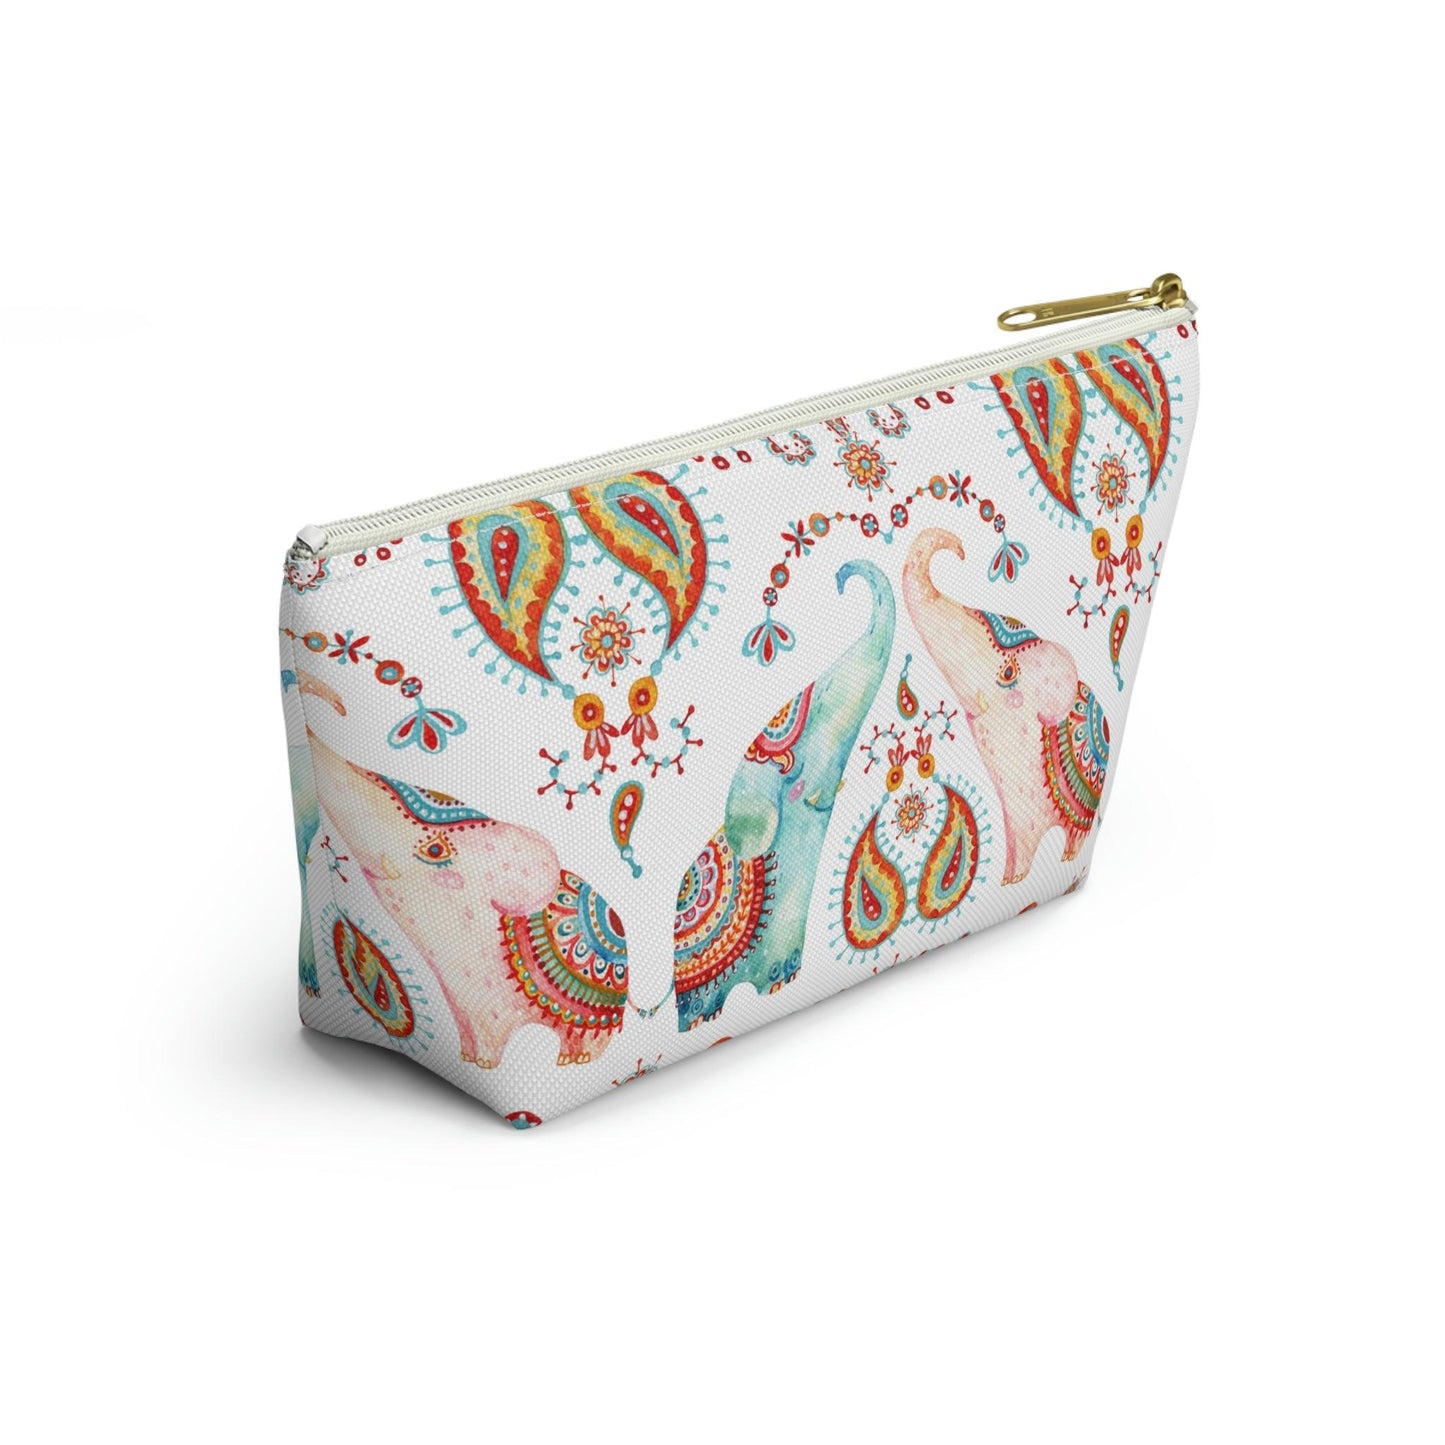 Indian Elephants Pouch - The Global Wanderer